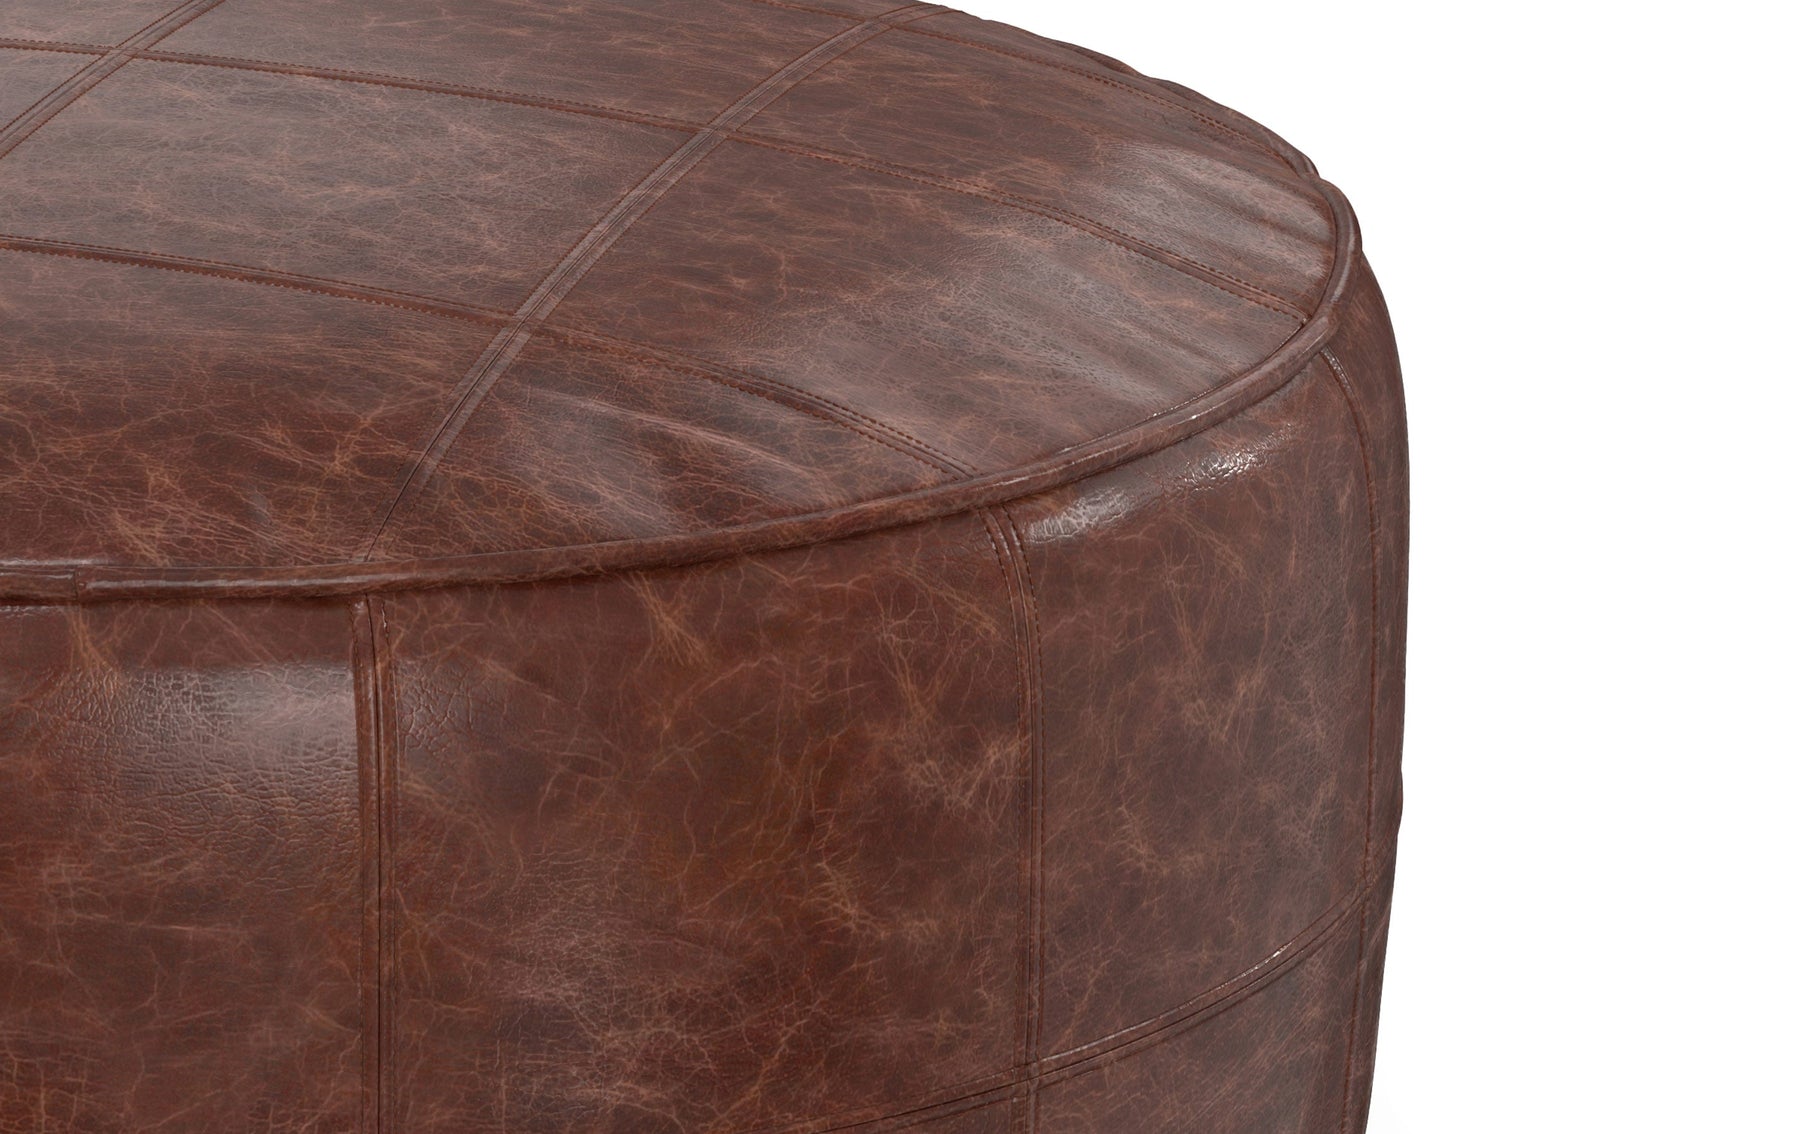 Connor 34 inch Round Coffee Table Pouf